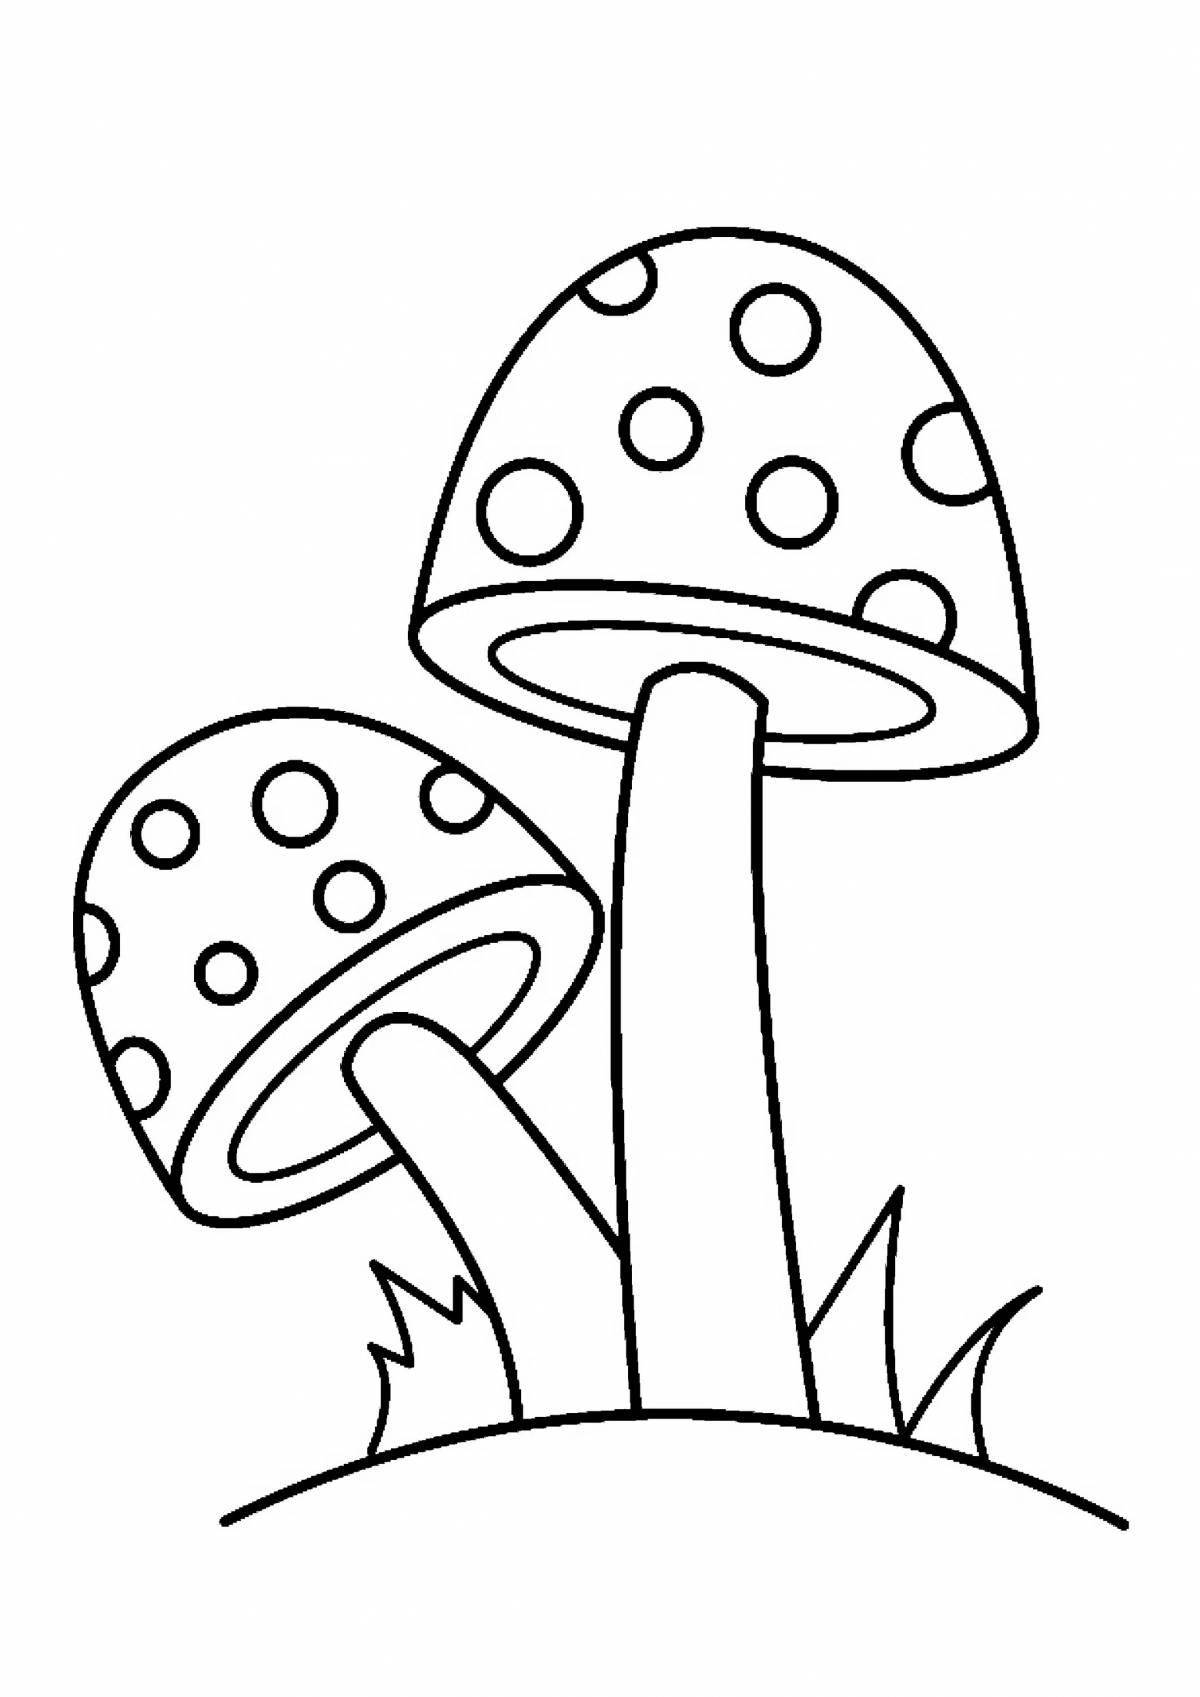 Coloring book dramatic fly agaric